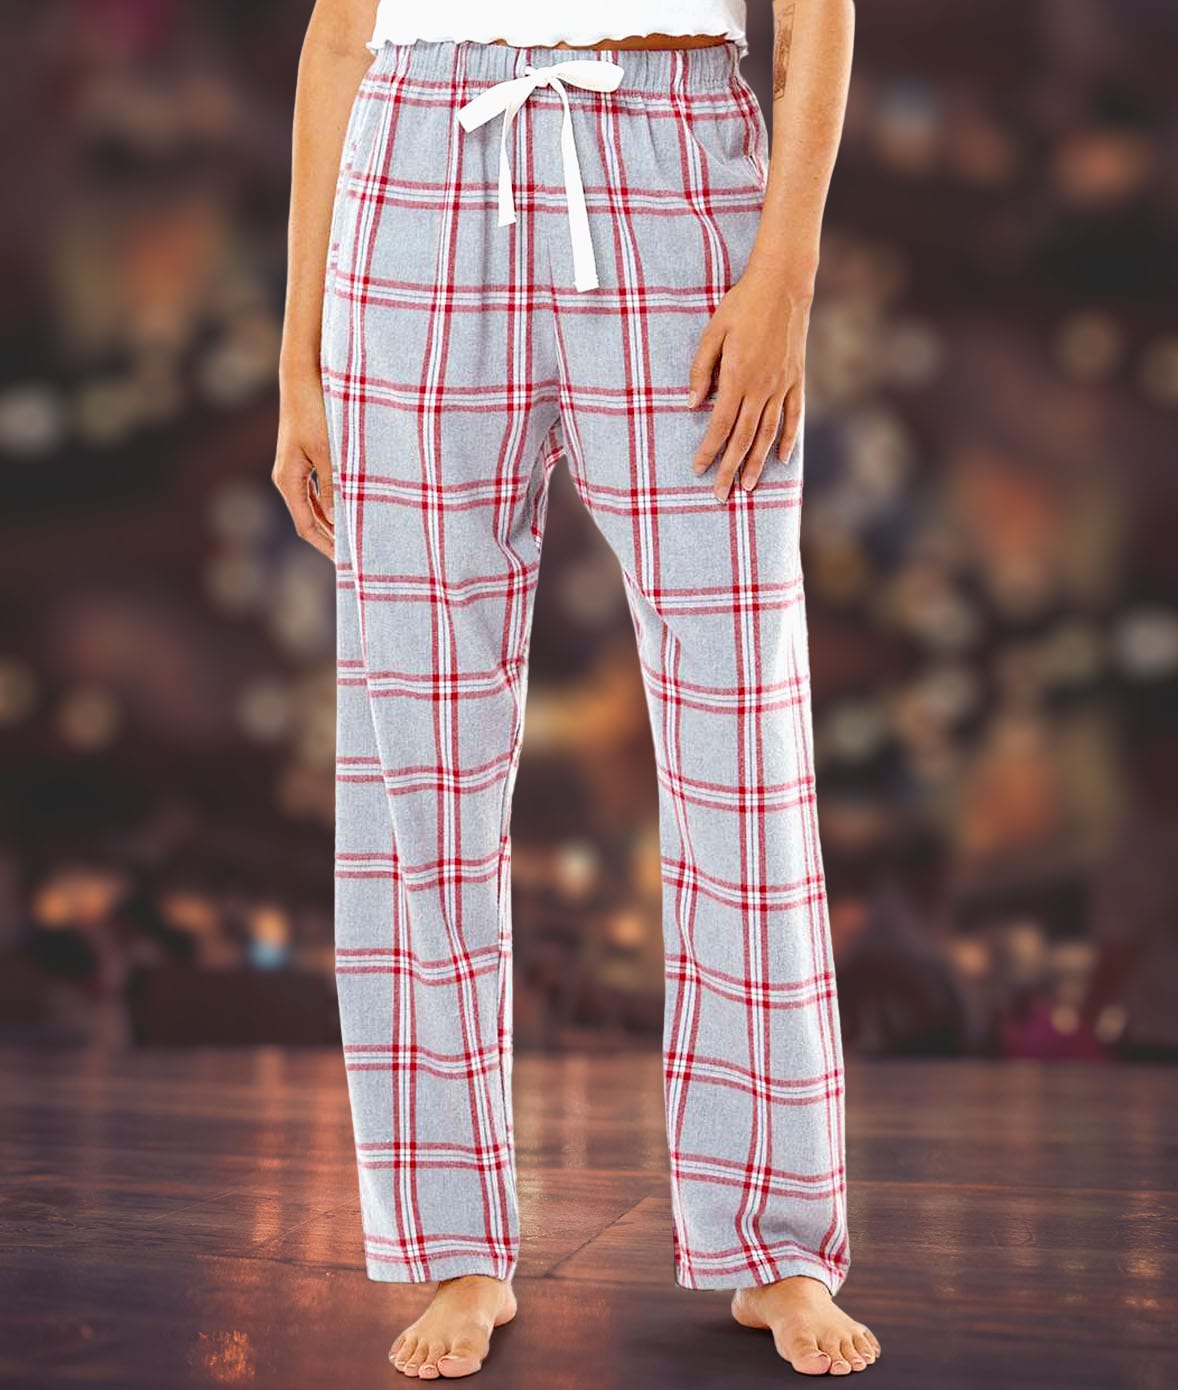 Women's Ridiculously Soft Brushed Flannel Lounge Pants with Pockets Worn by Model